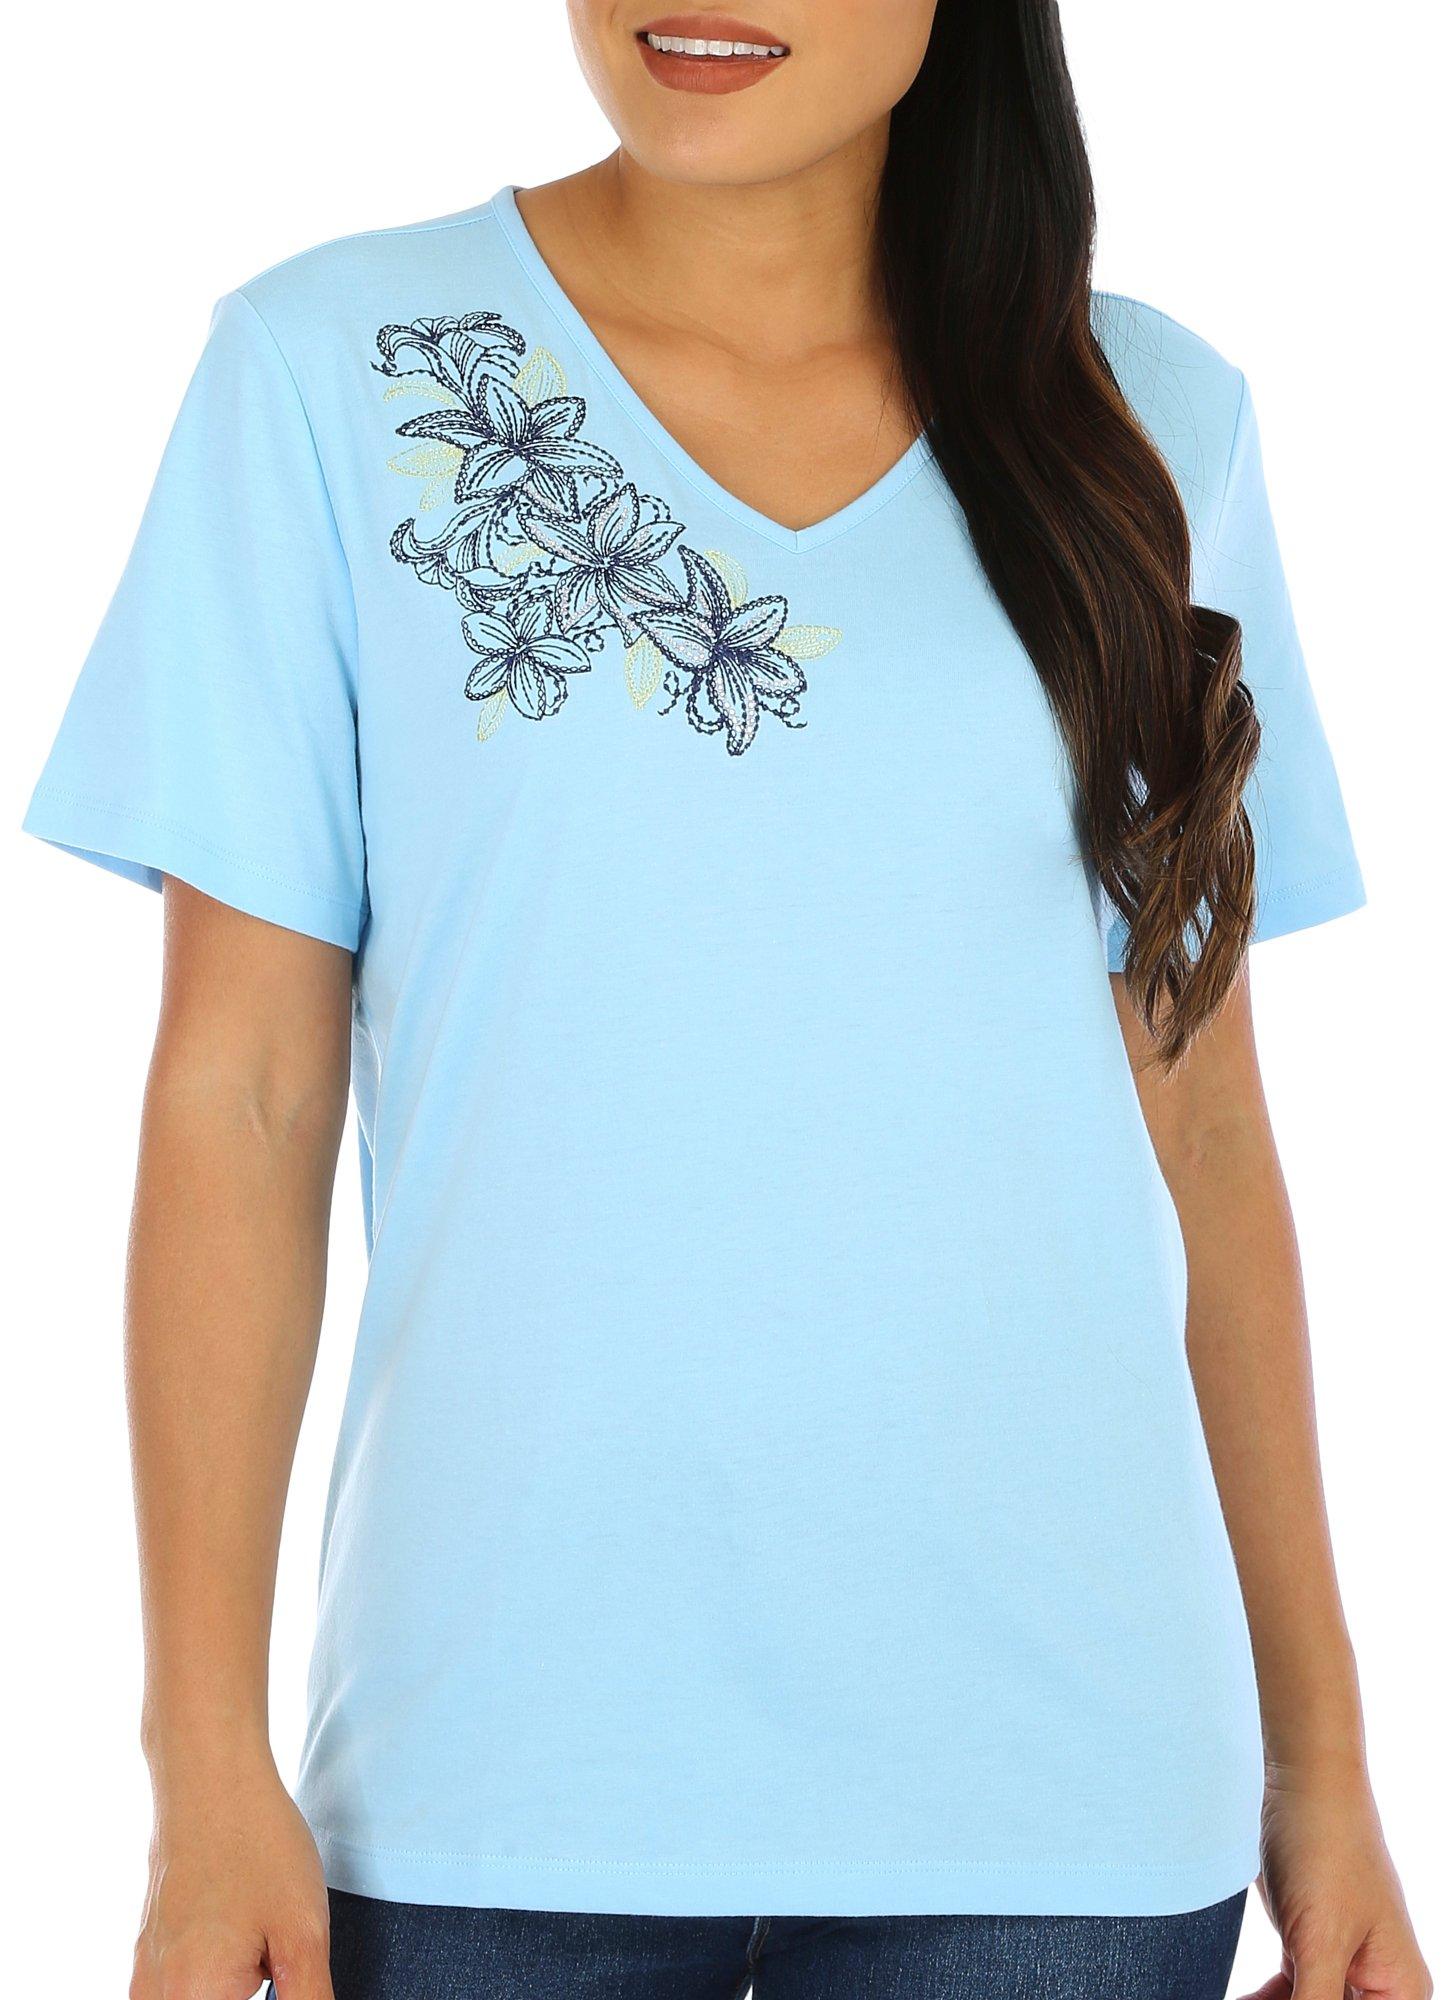 Coral Bay Womens Embroidered Floral Short Sleeve Top